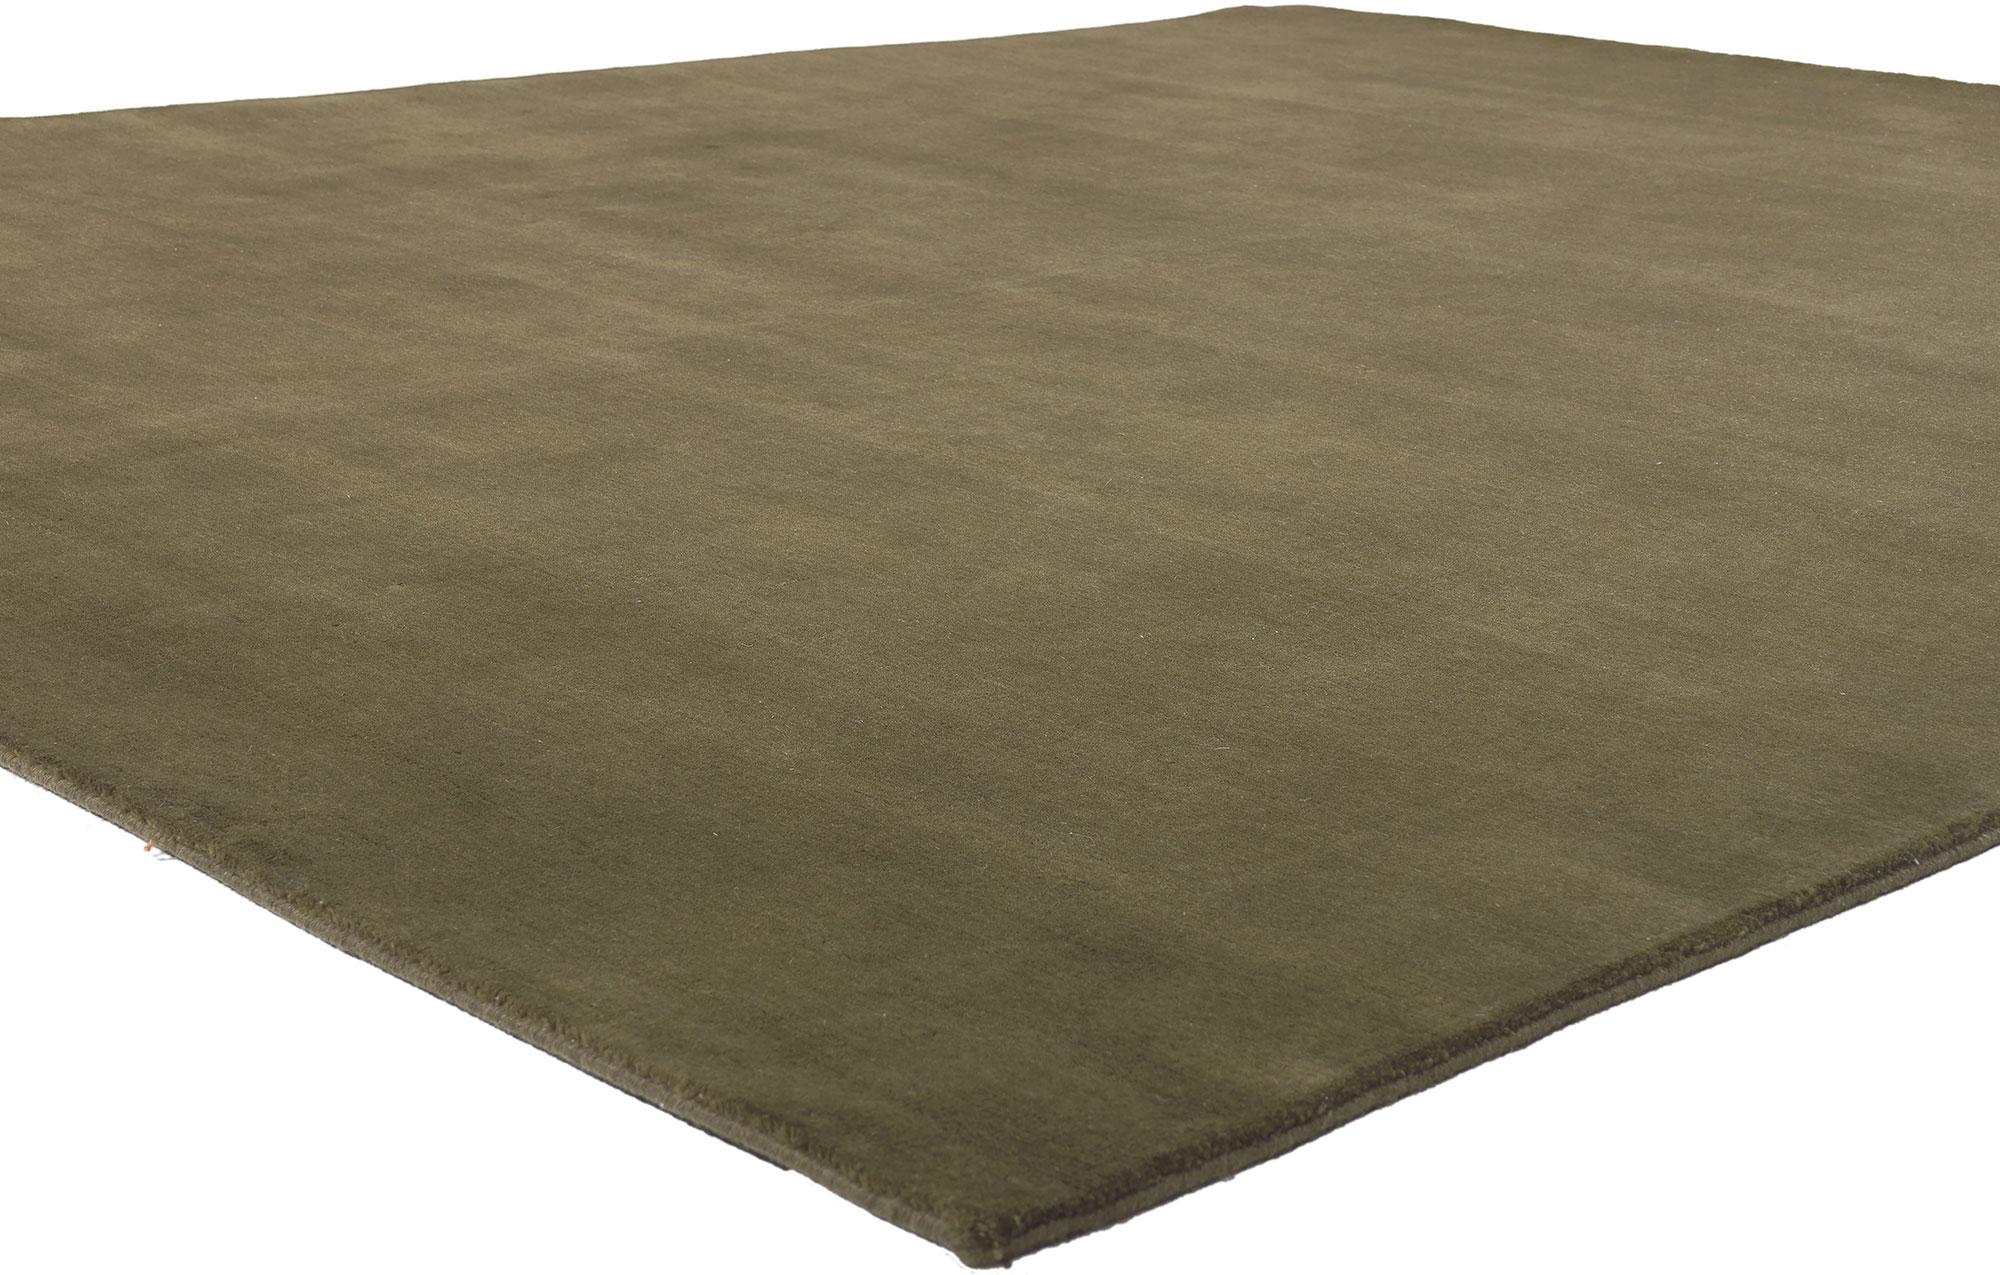 30997 New Moss-Olive Green Modern Rug, 07'11 x 09'09.
Biophilic Design meets earth-tone elegance in this handcrafted modern olive green area rug. The lavish texture and earthy green colorway woven into this piece work together creating a truly